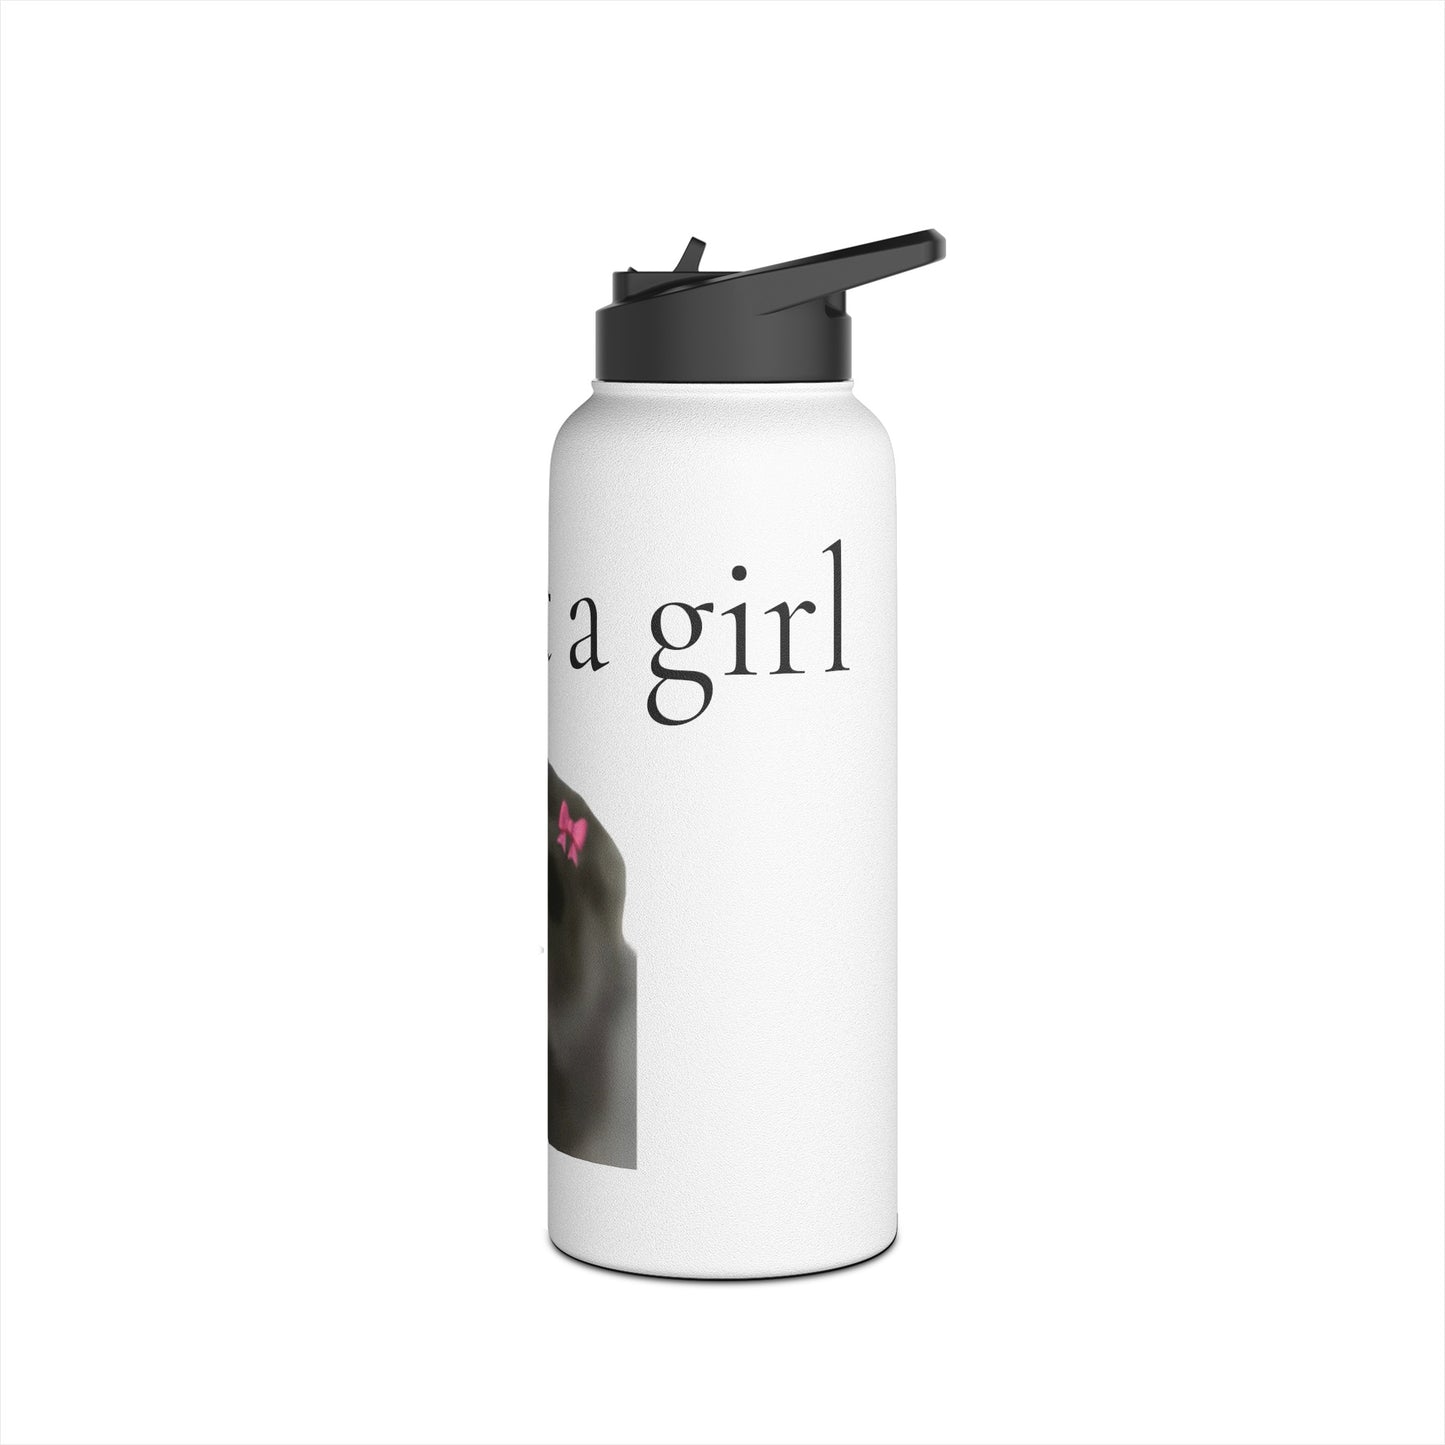 Im just a girl bottle